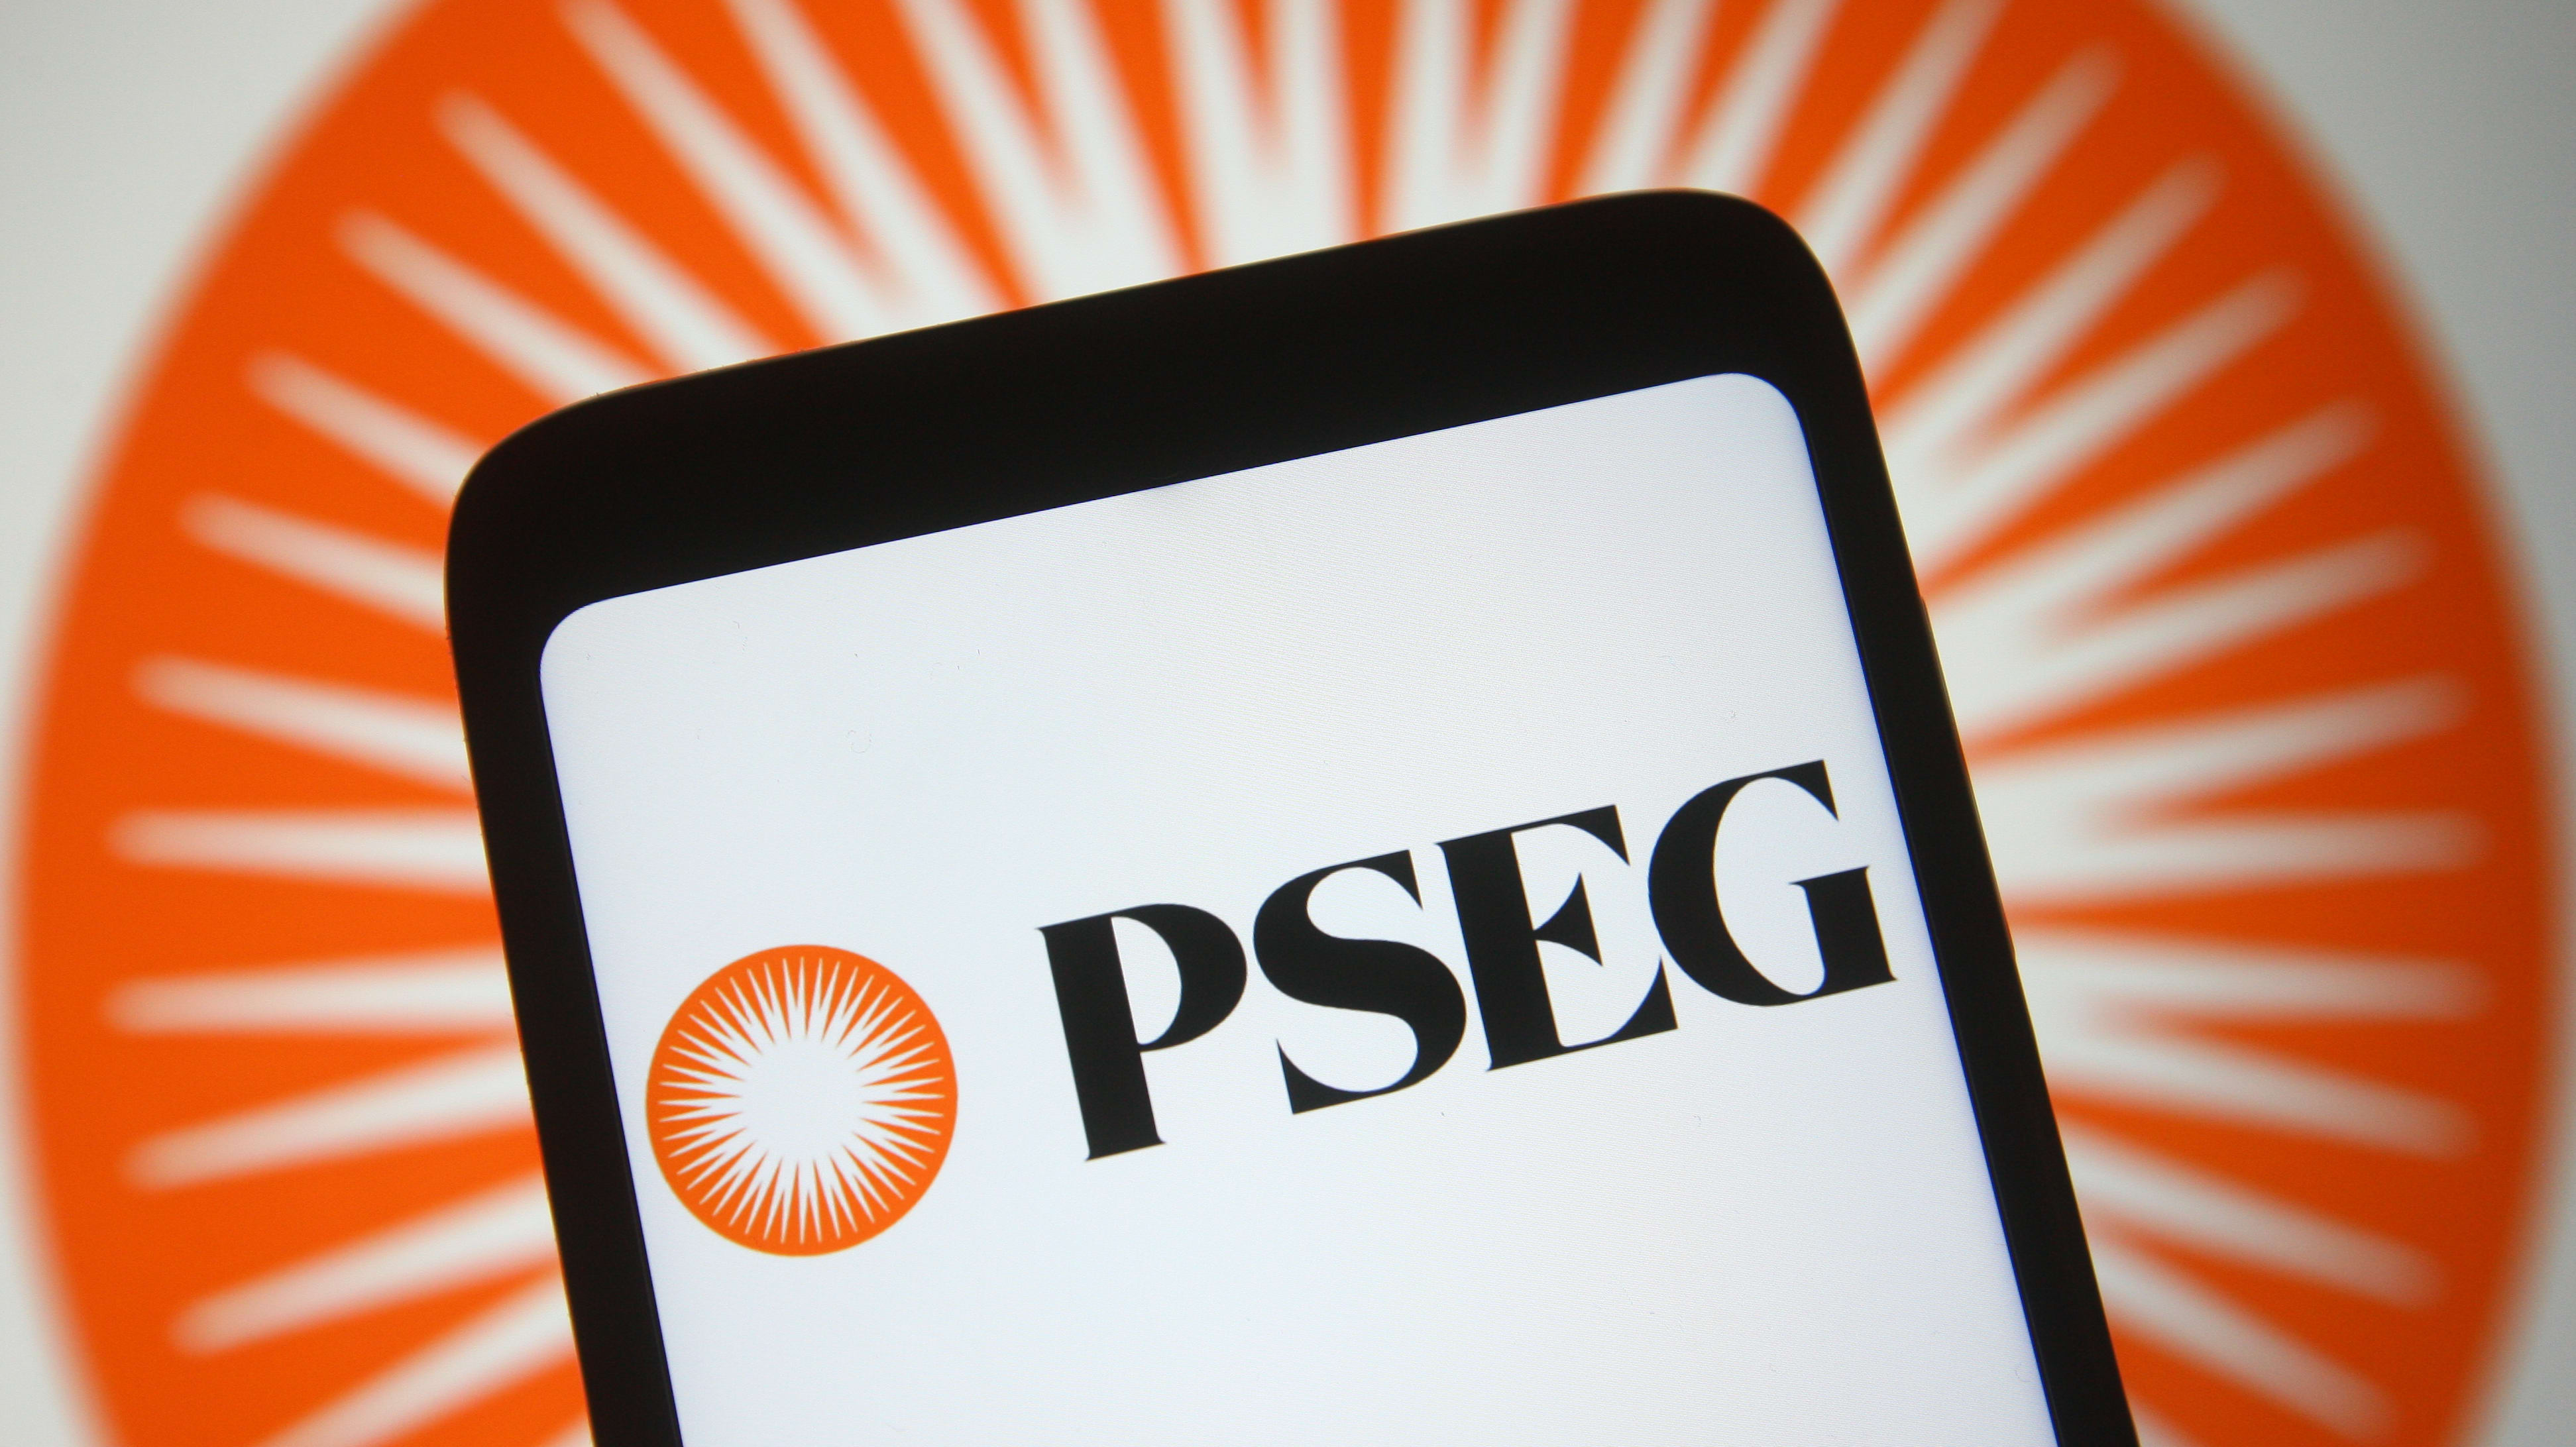 nj-utility-pseg-adds-hundreds-of-millions-in-new-infrastructure-spend